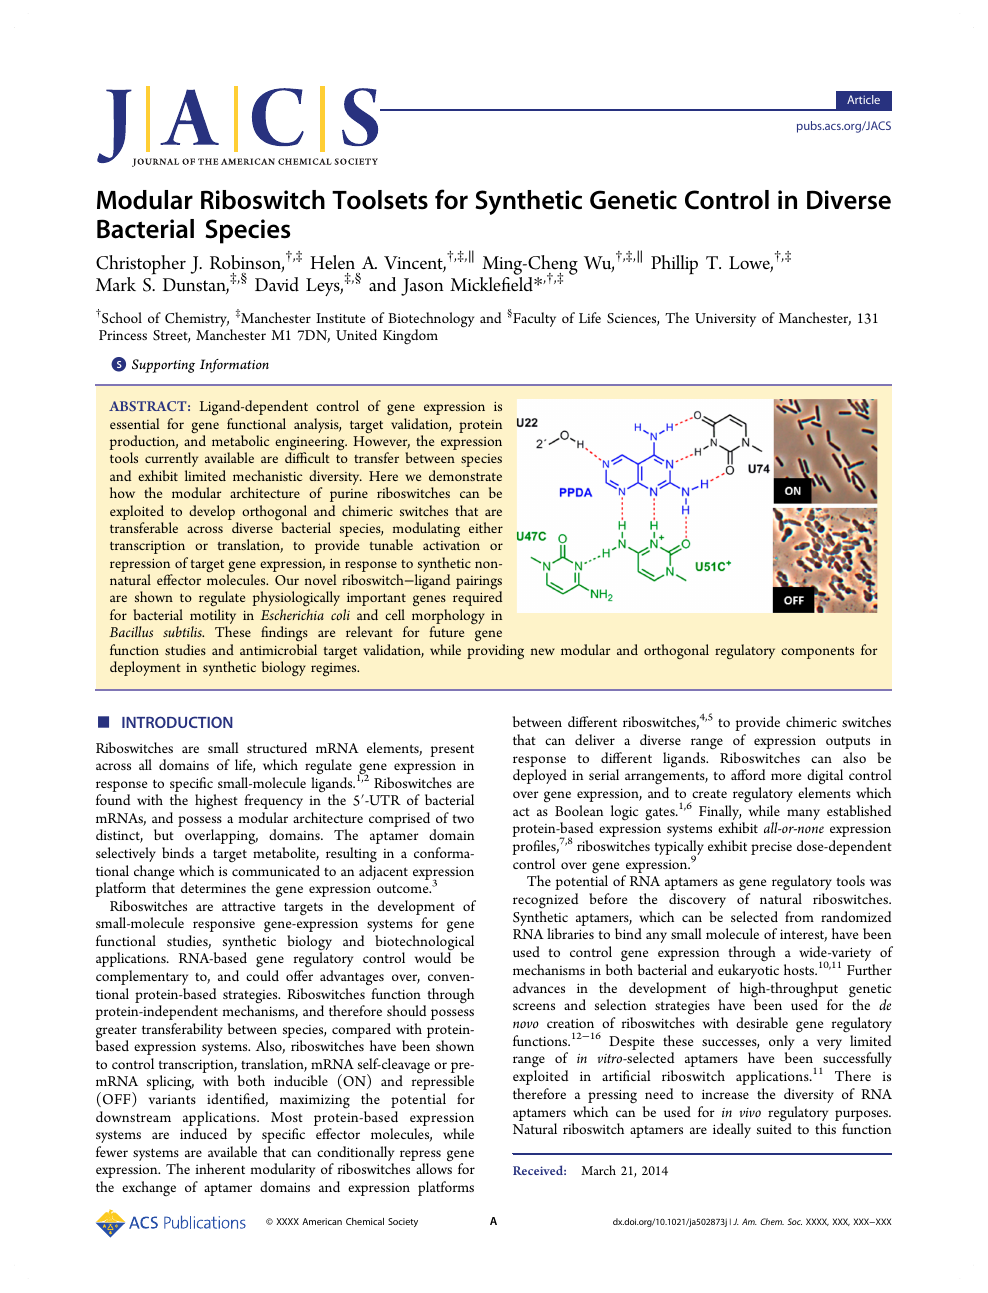 Modular Riboswitch Toolsets For Synthetic Genetic Control In Diverse Bacterial Species Topic Of Research Paper In Biological Sciences Download Scholarly Article Pdf And Read For Free On Cyberleninka Open Science Hub